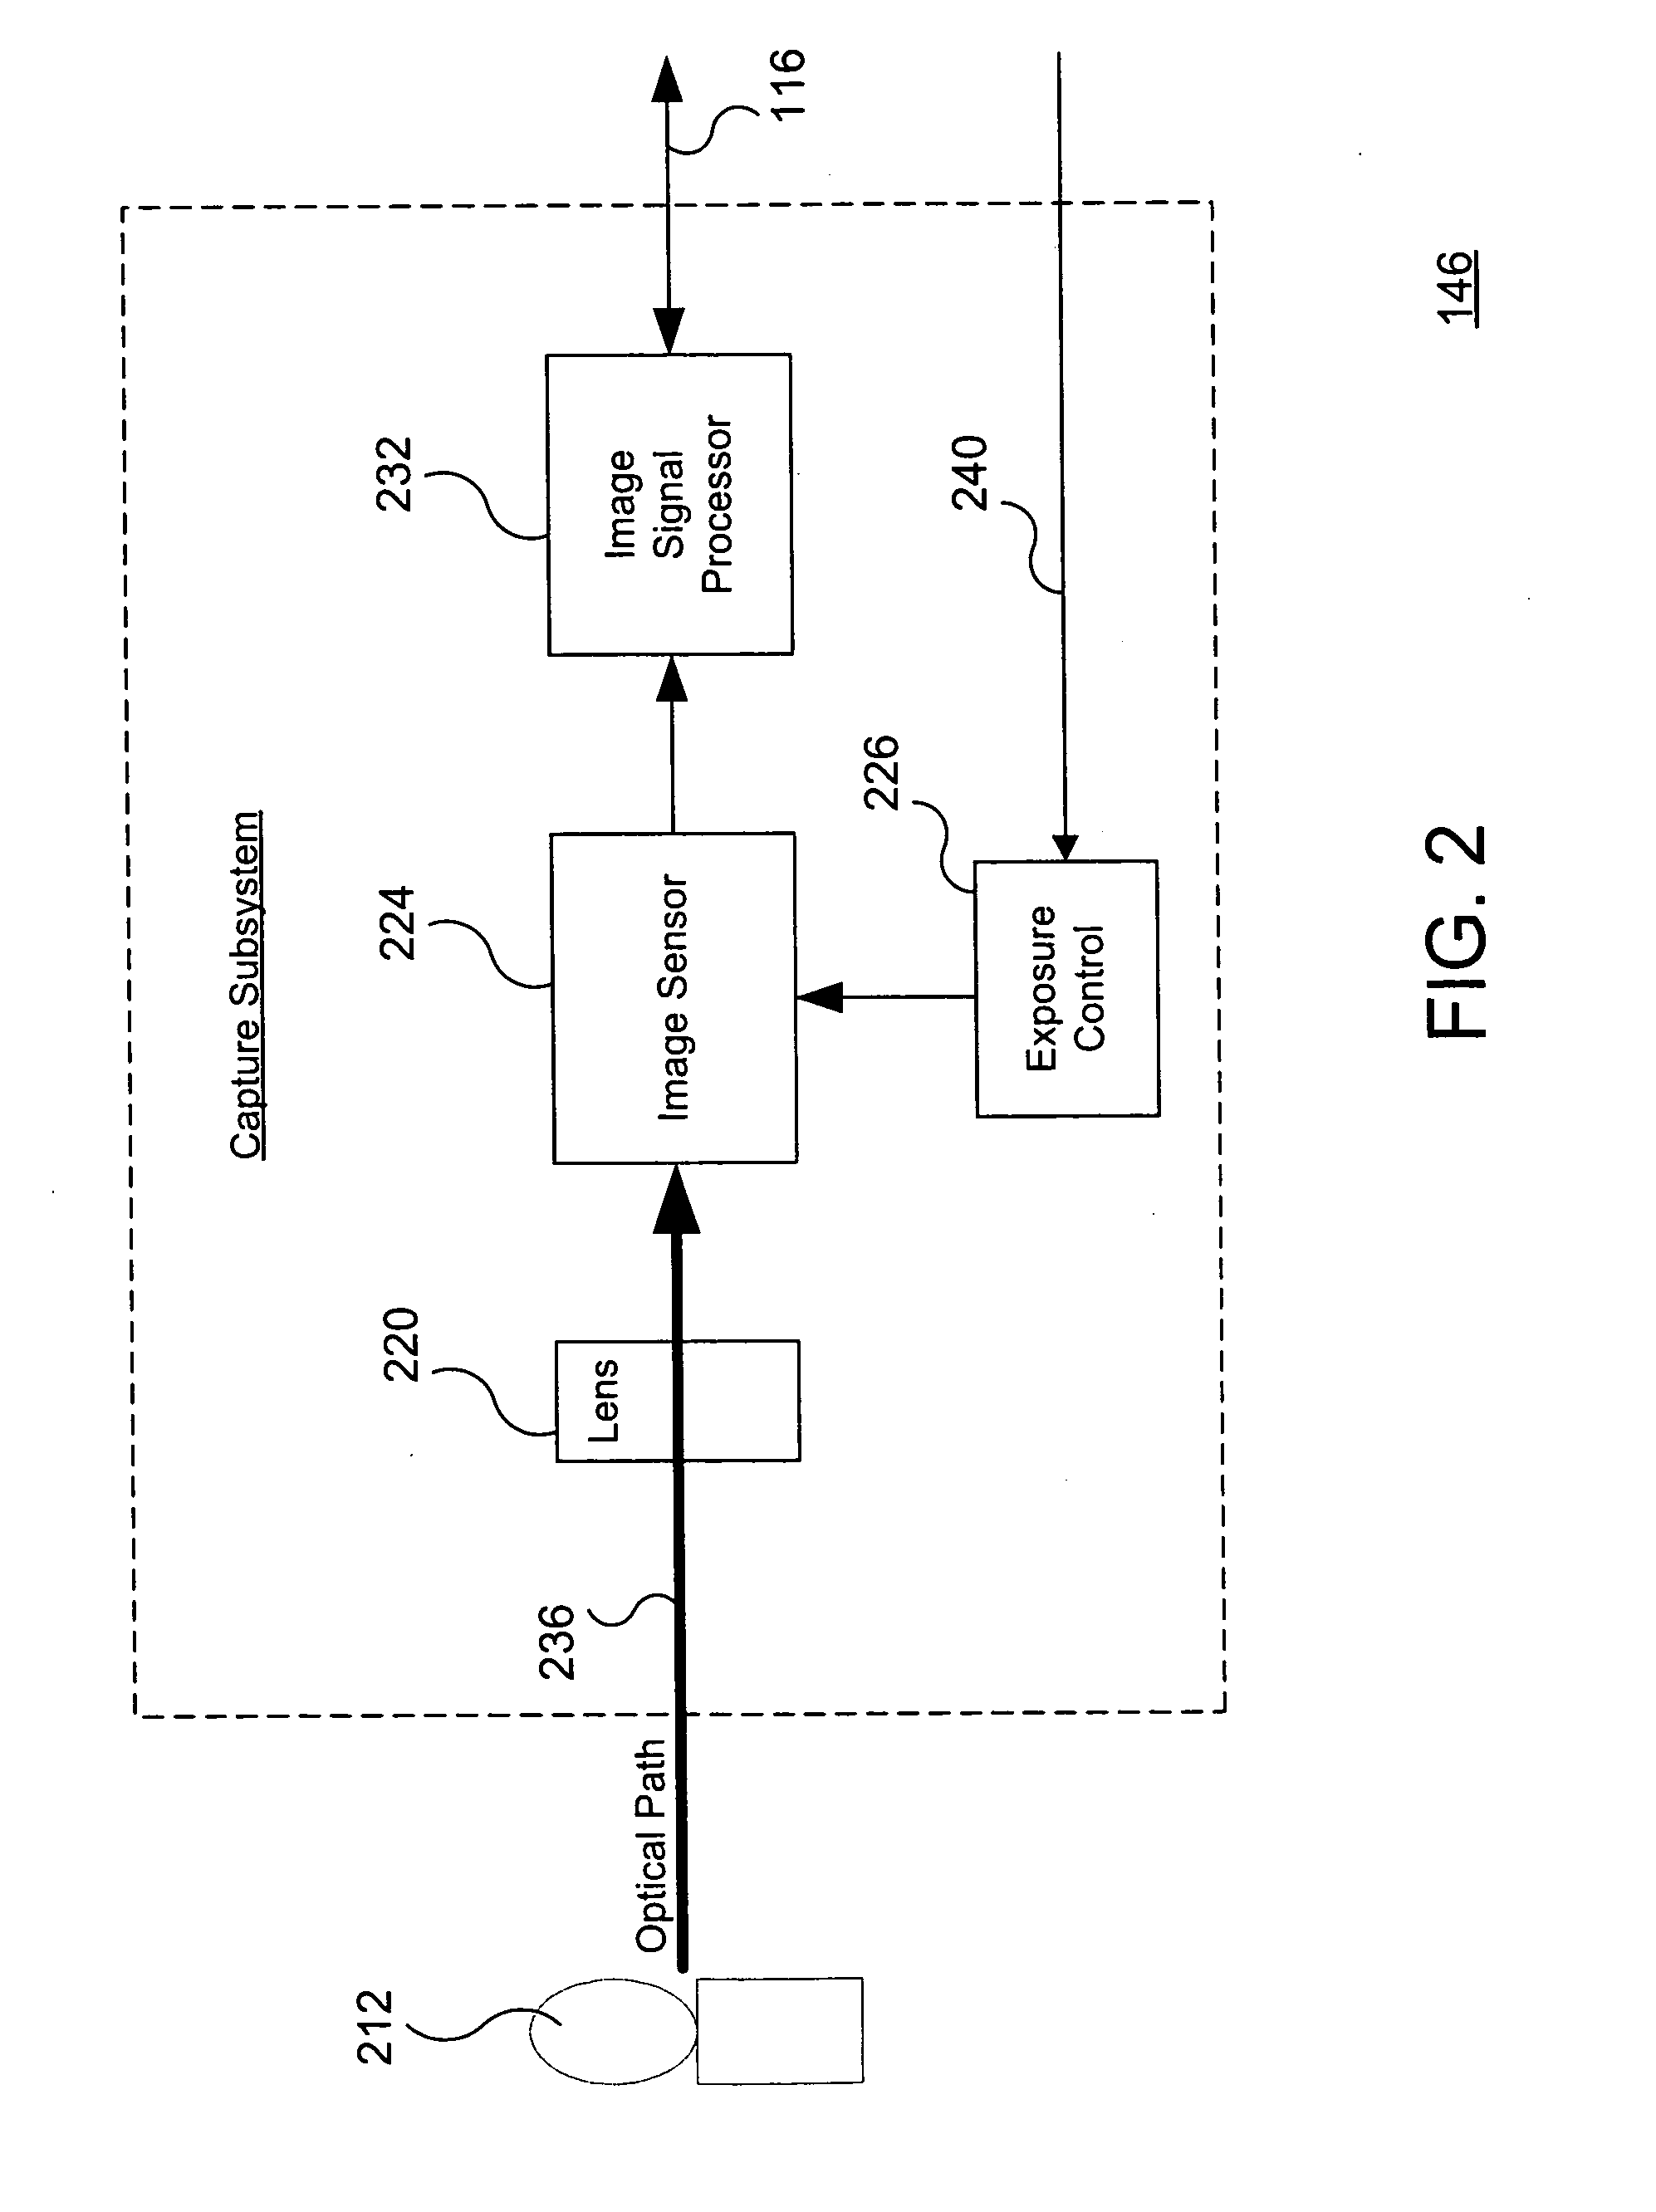 System and method for effectively utilizing a live preview mode in an electronic imaging device